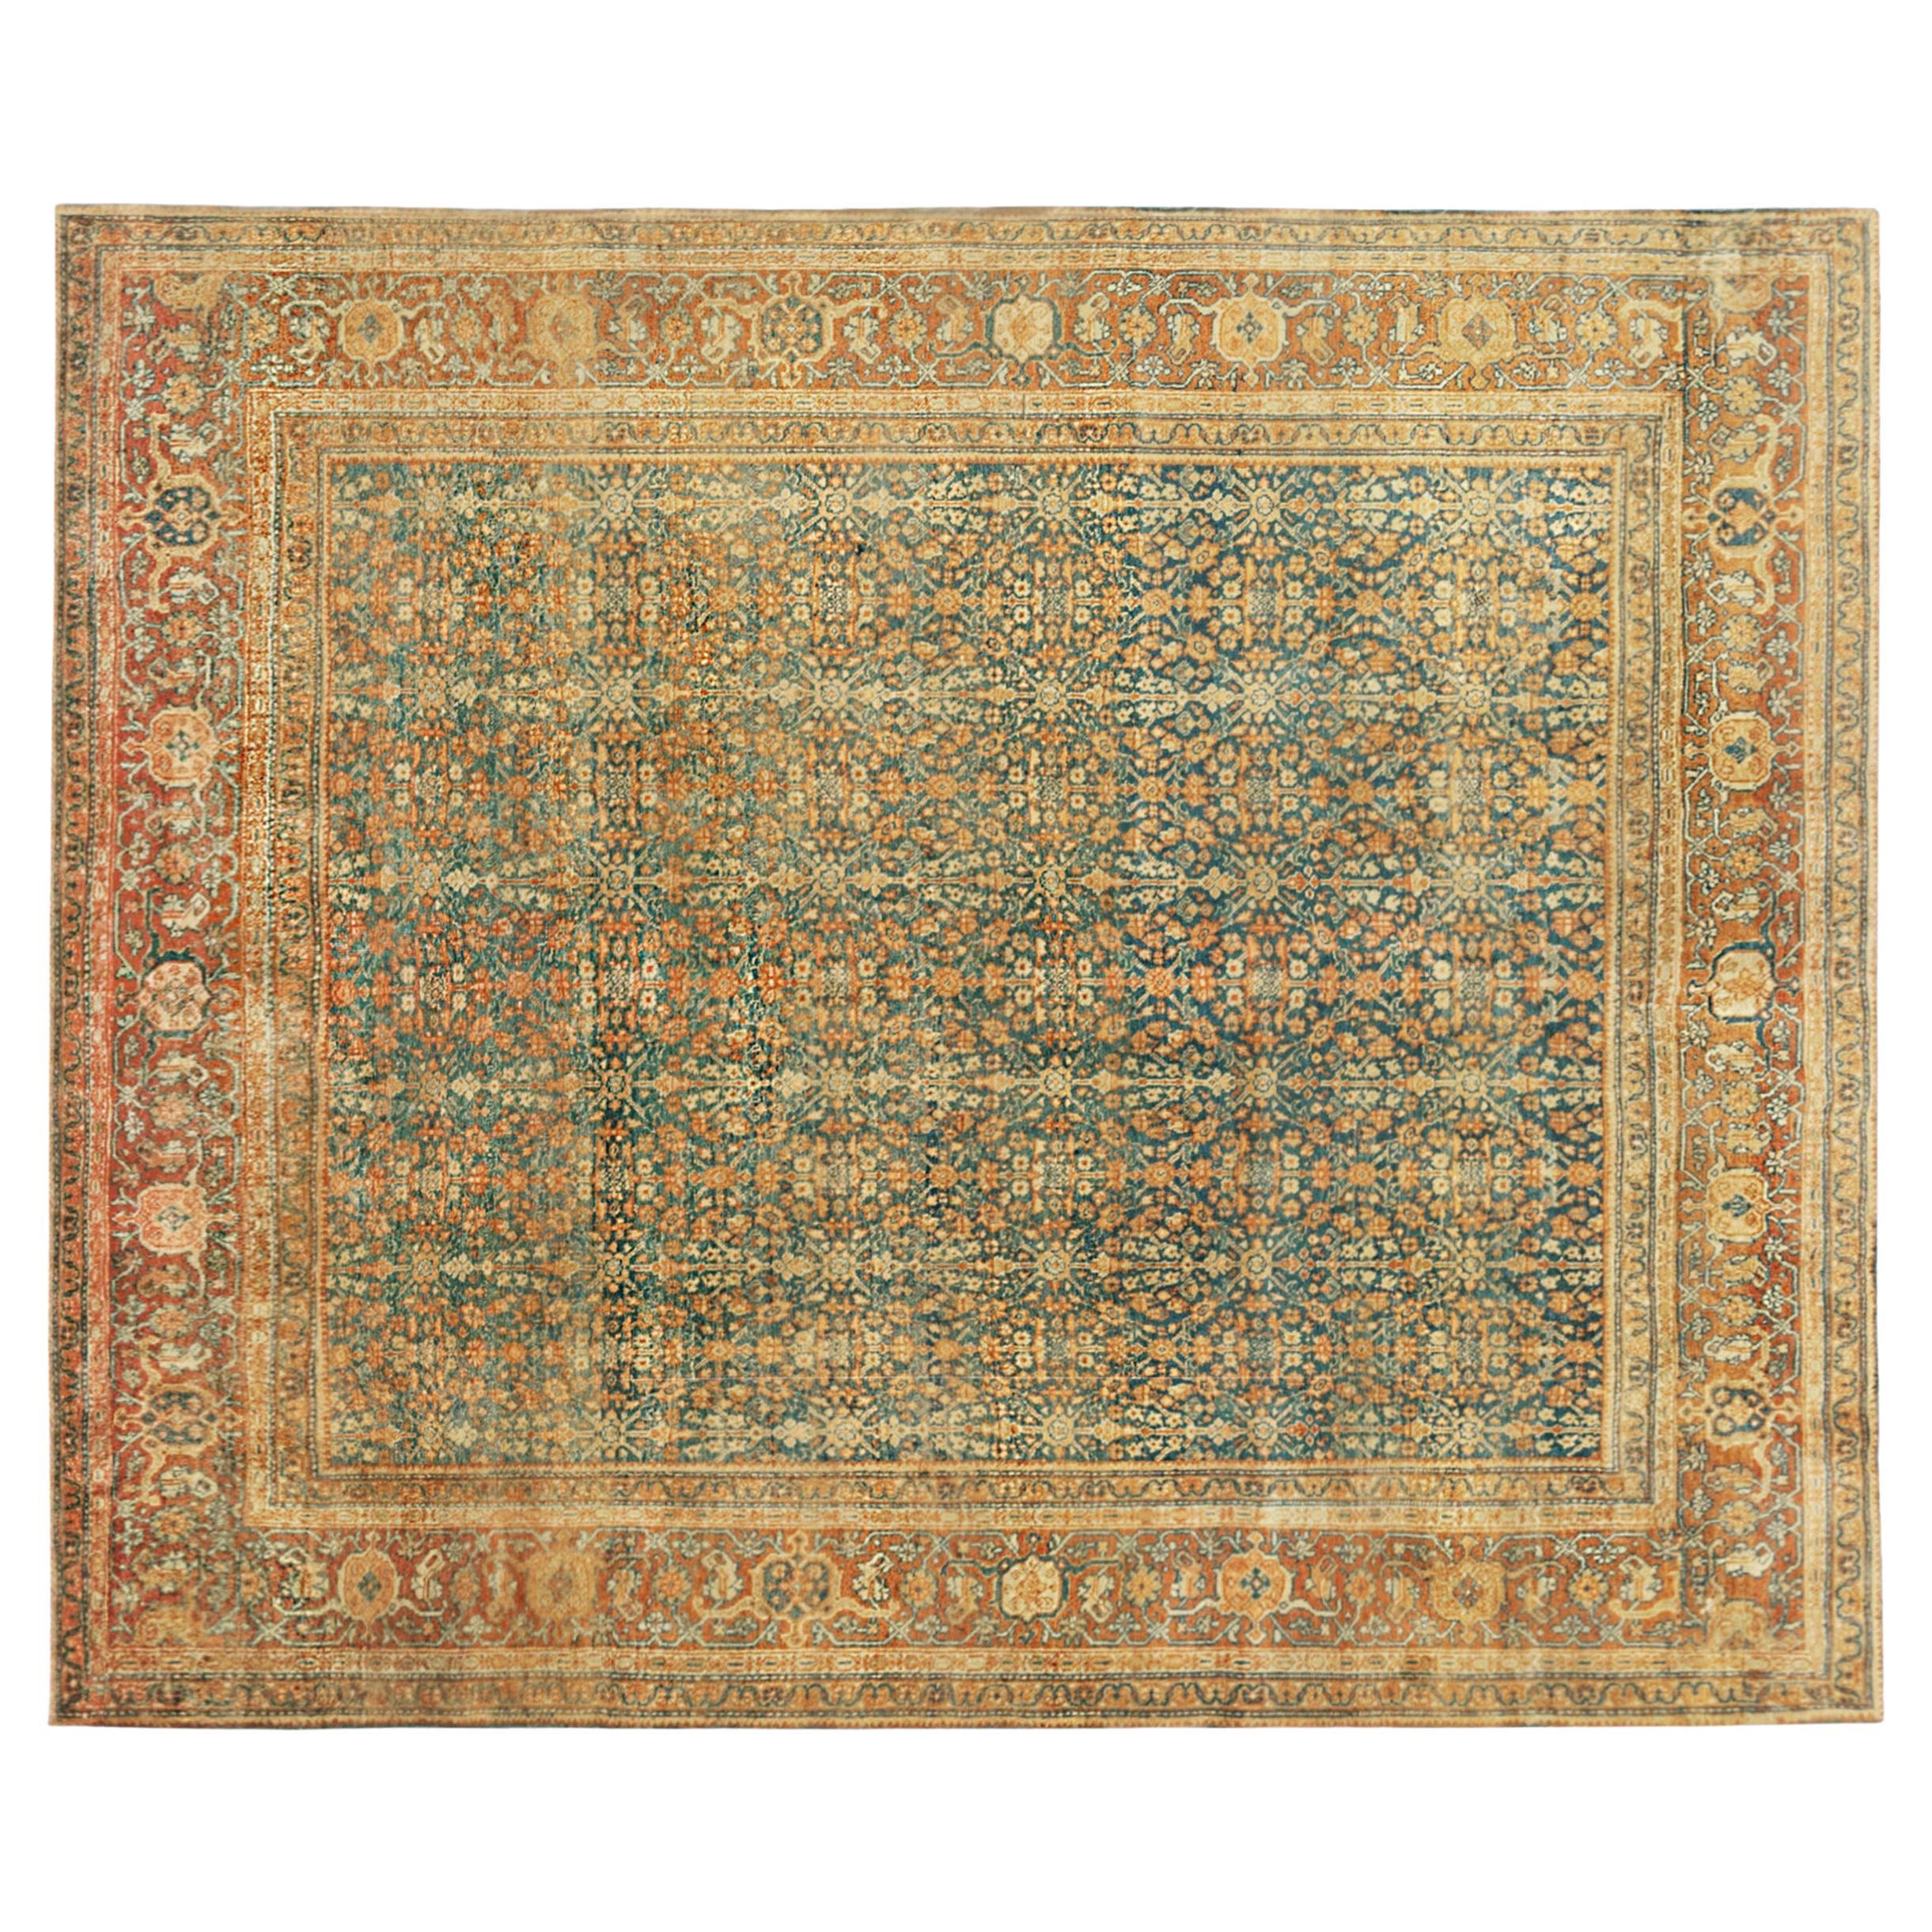 Antique Persian Tabriz Oriental Carpet in Room Size with Repeating Design For Sale